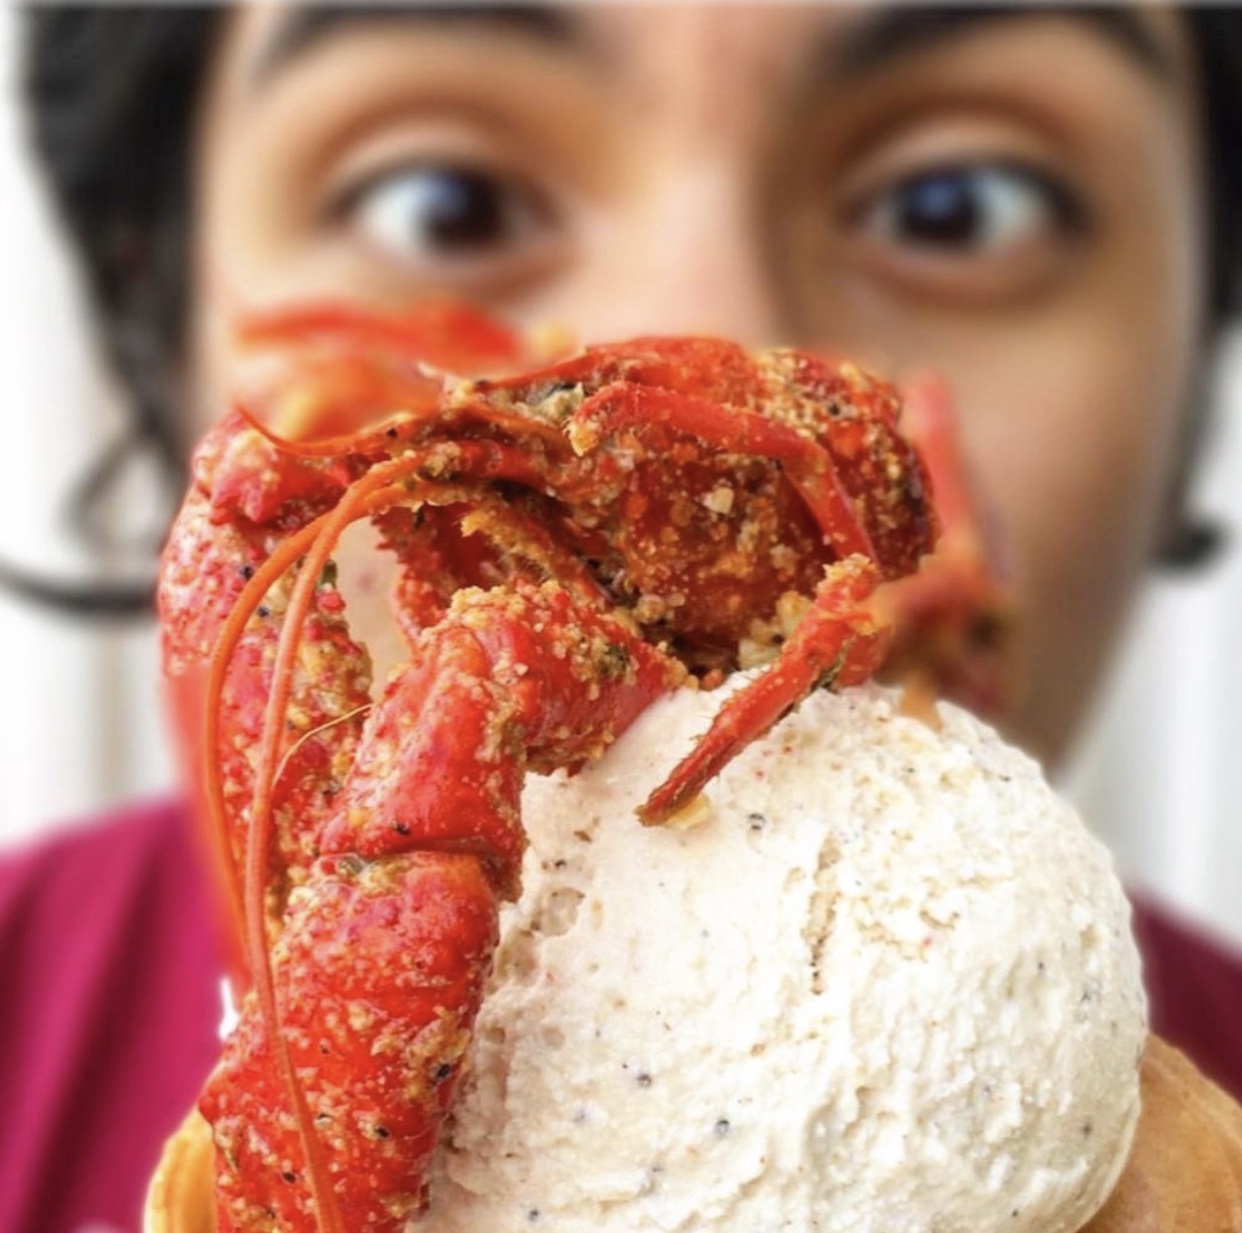 woman holding ice cream cone with a crawfish on top